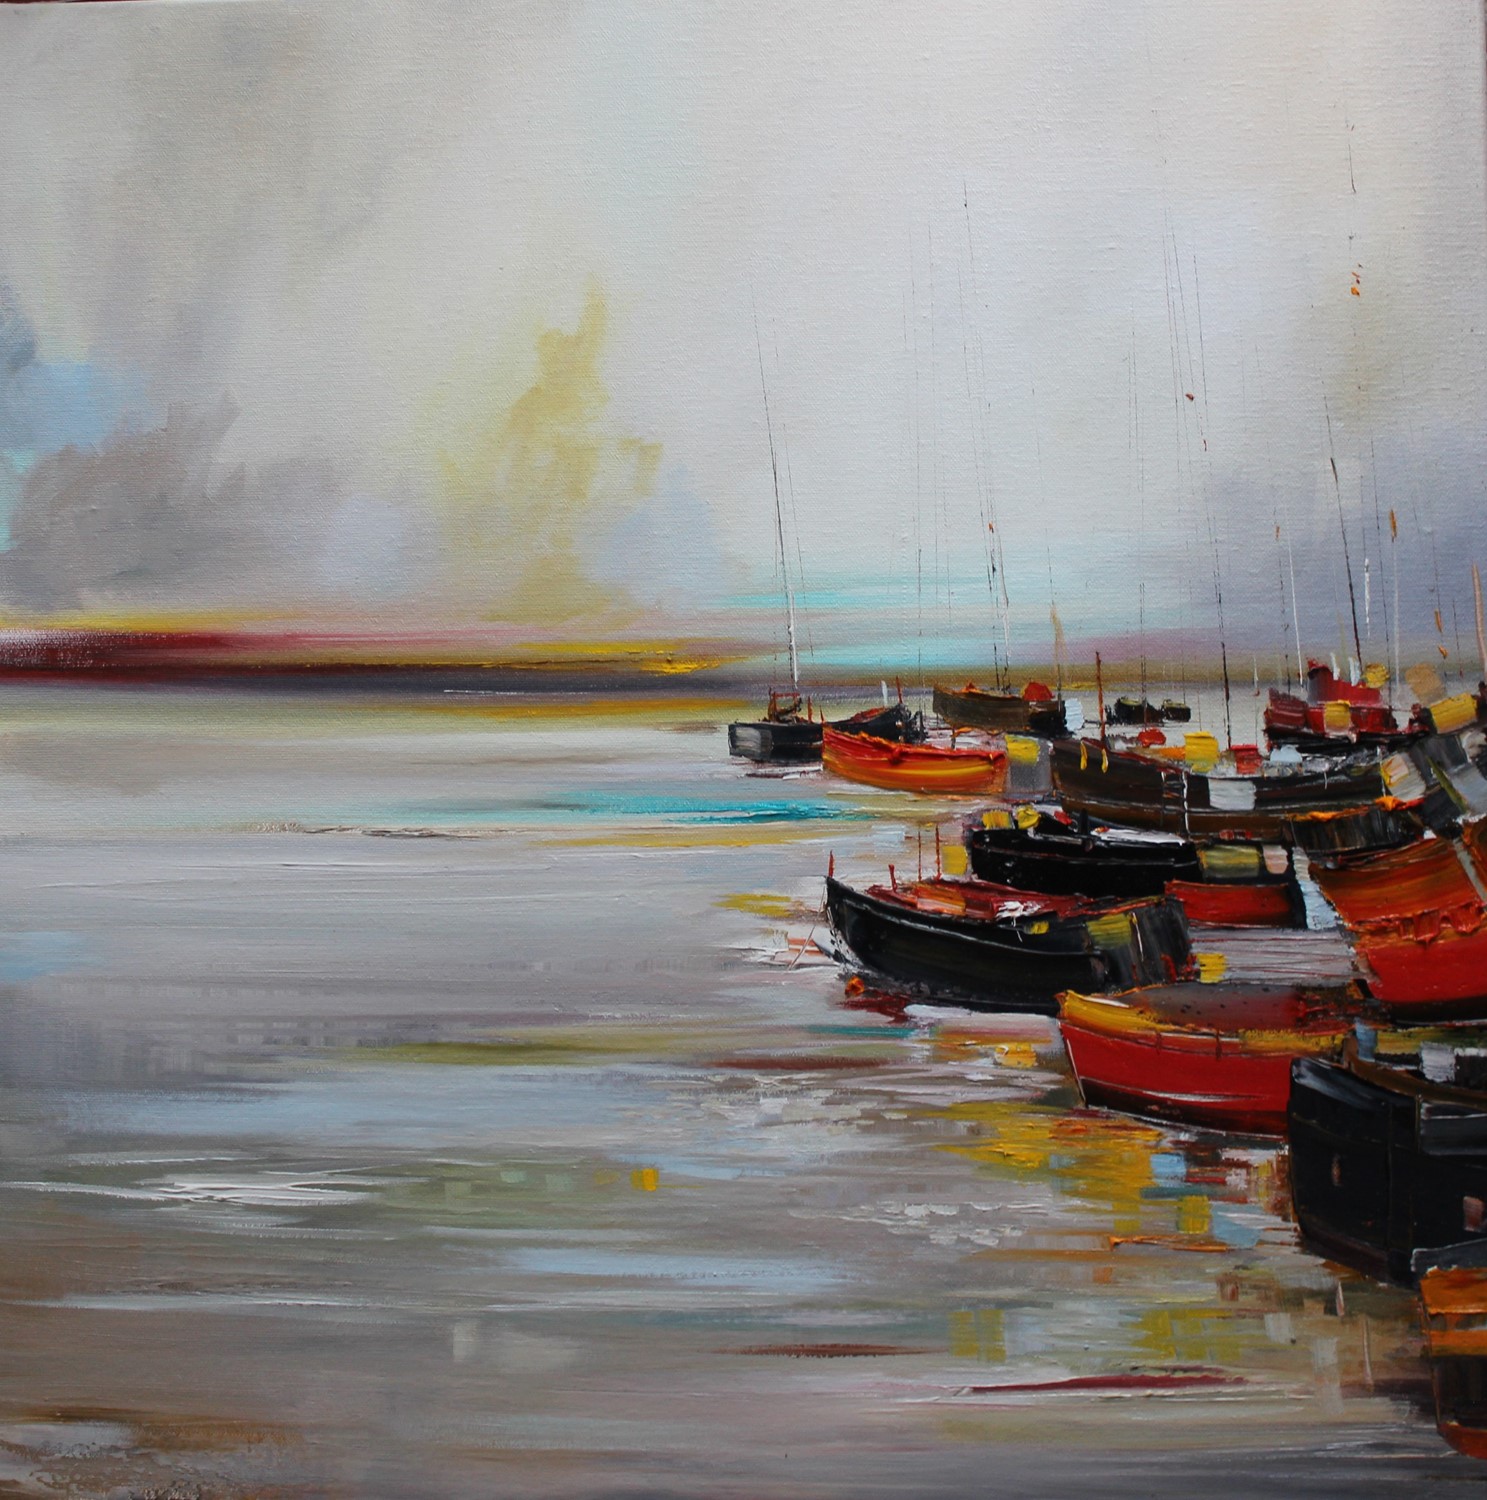 'Still Waters at the Harbour' by artist Rosanne Barr